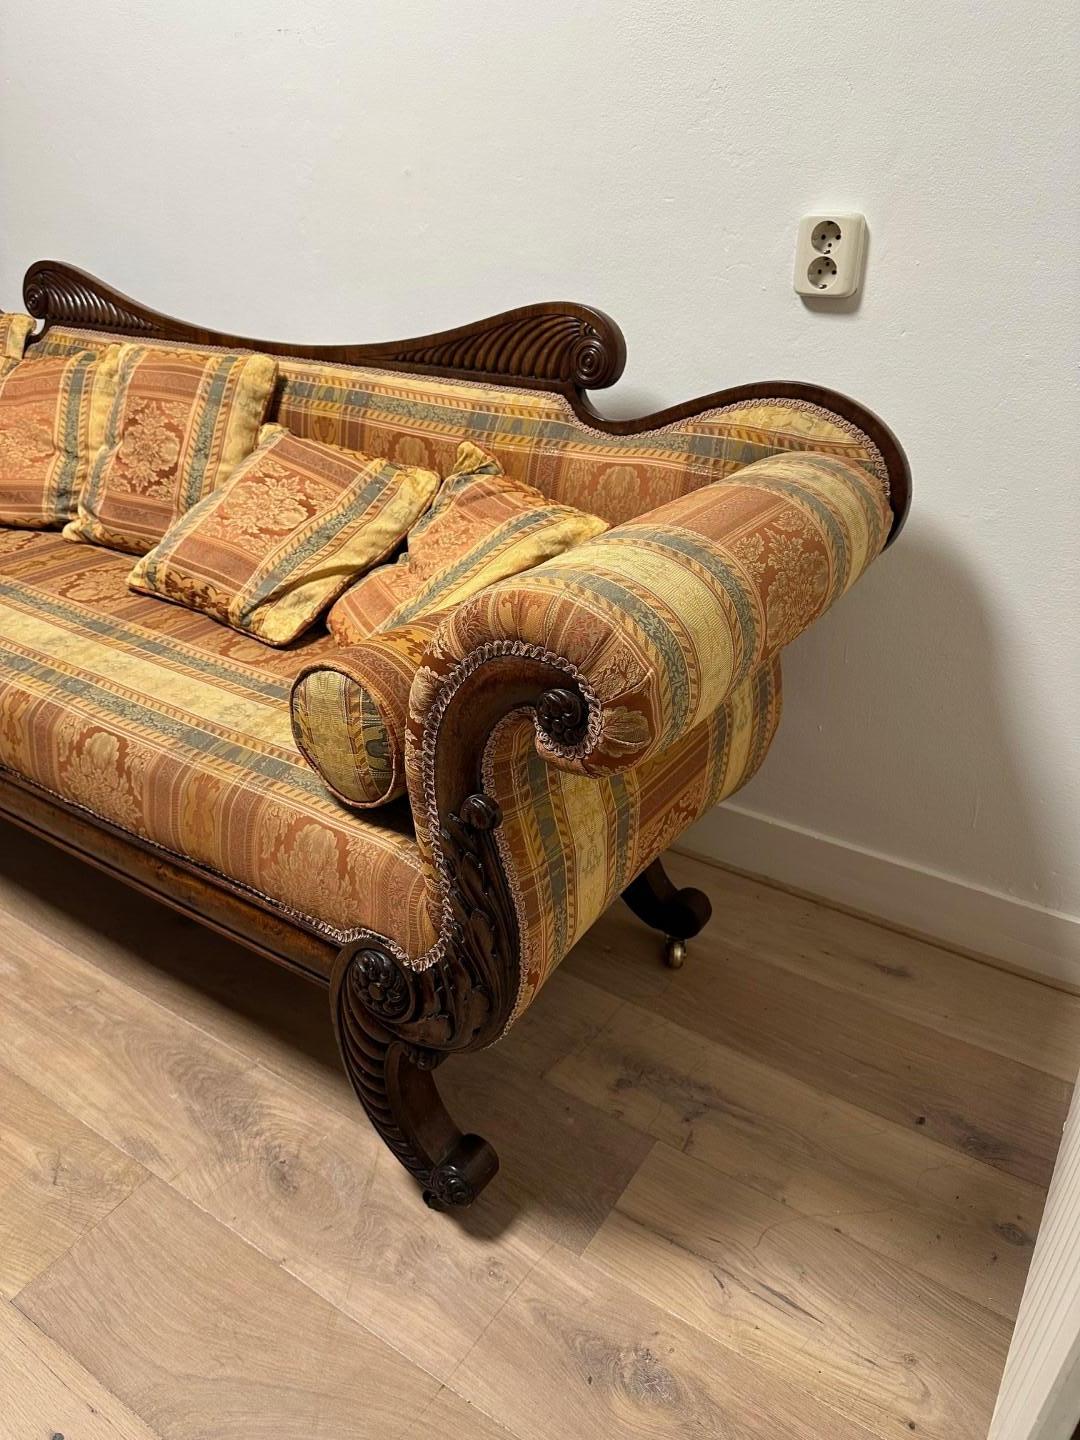 Impressive antique regency mahogany 3-seater sofa. An early 19th century Regency mahogany sofa is an elegant piece of furniture typical of the Regency period in the United Kingdom (approximately 1811-1820).

The Regency style is characterized by a